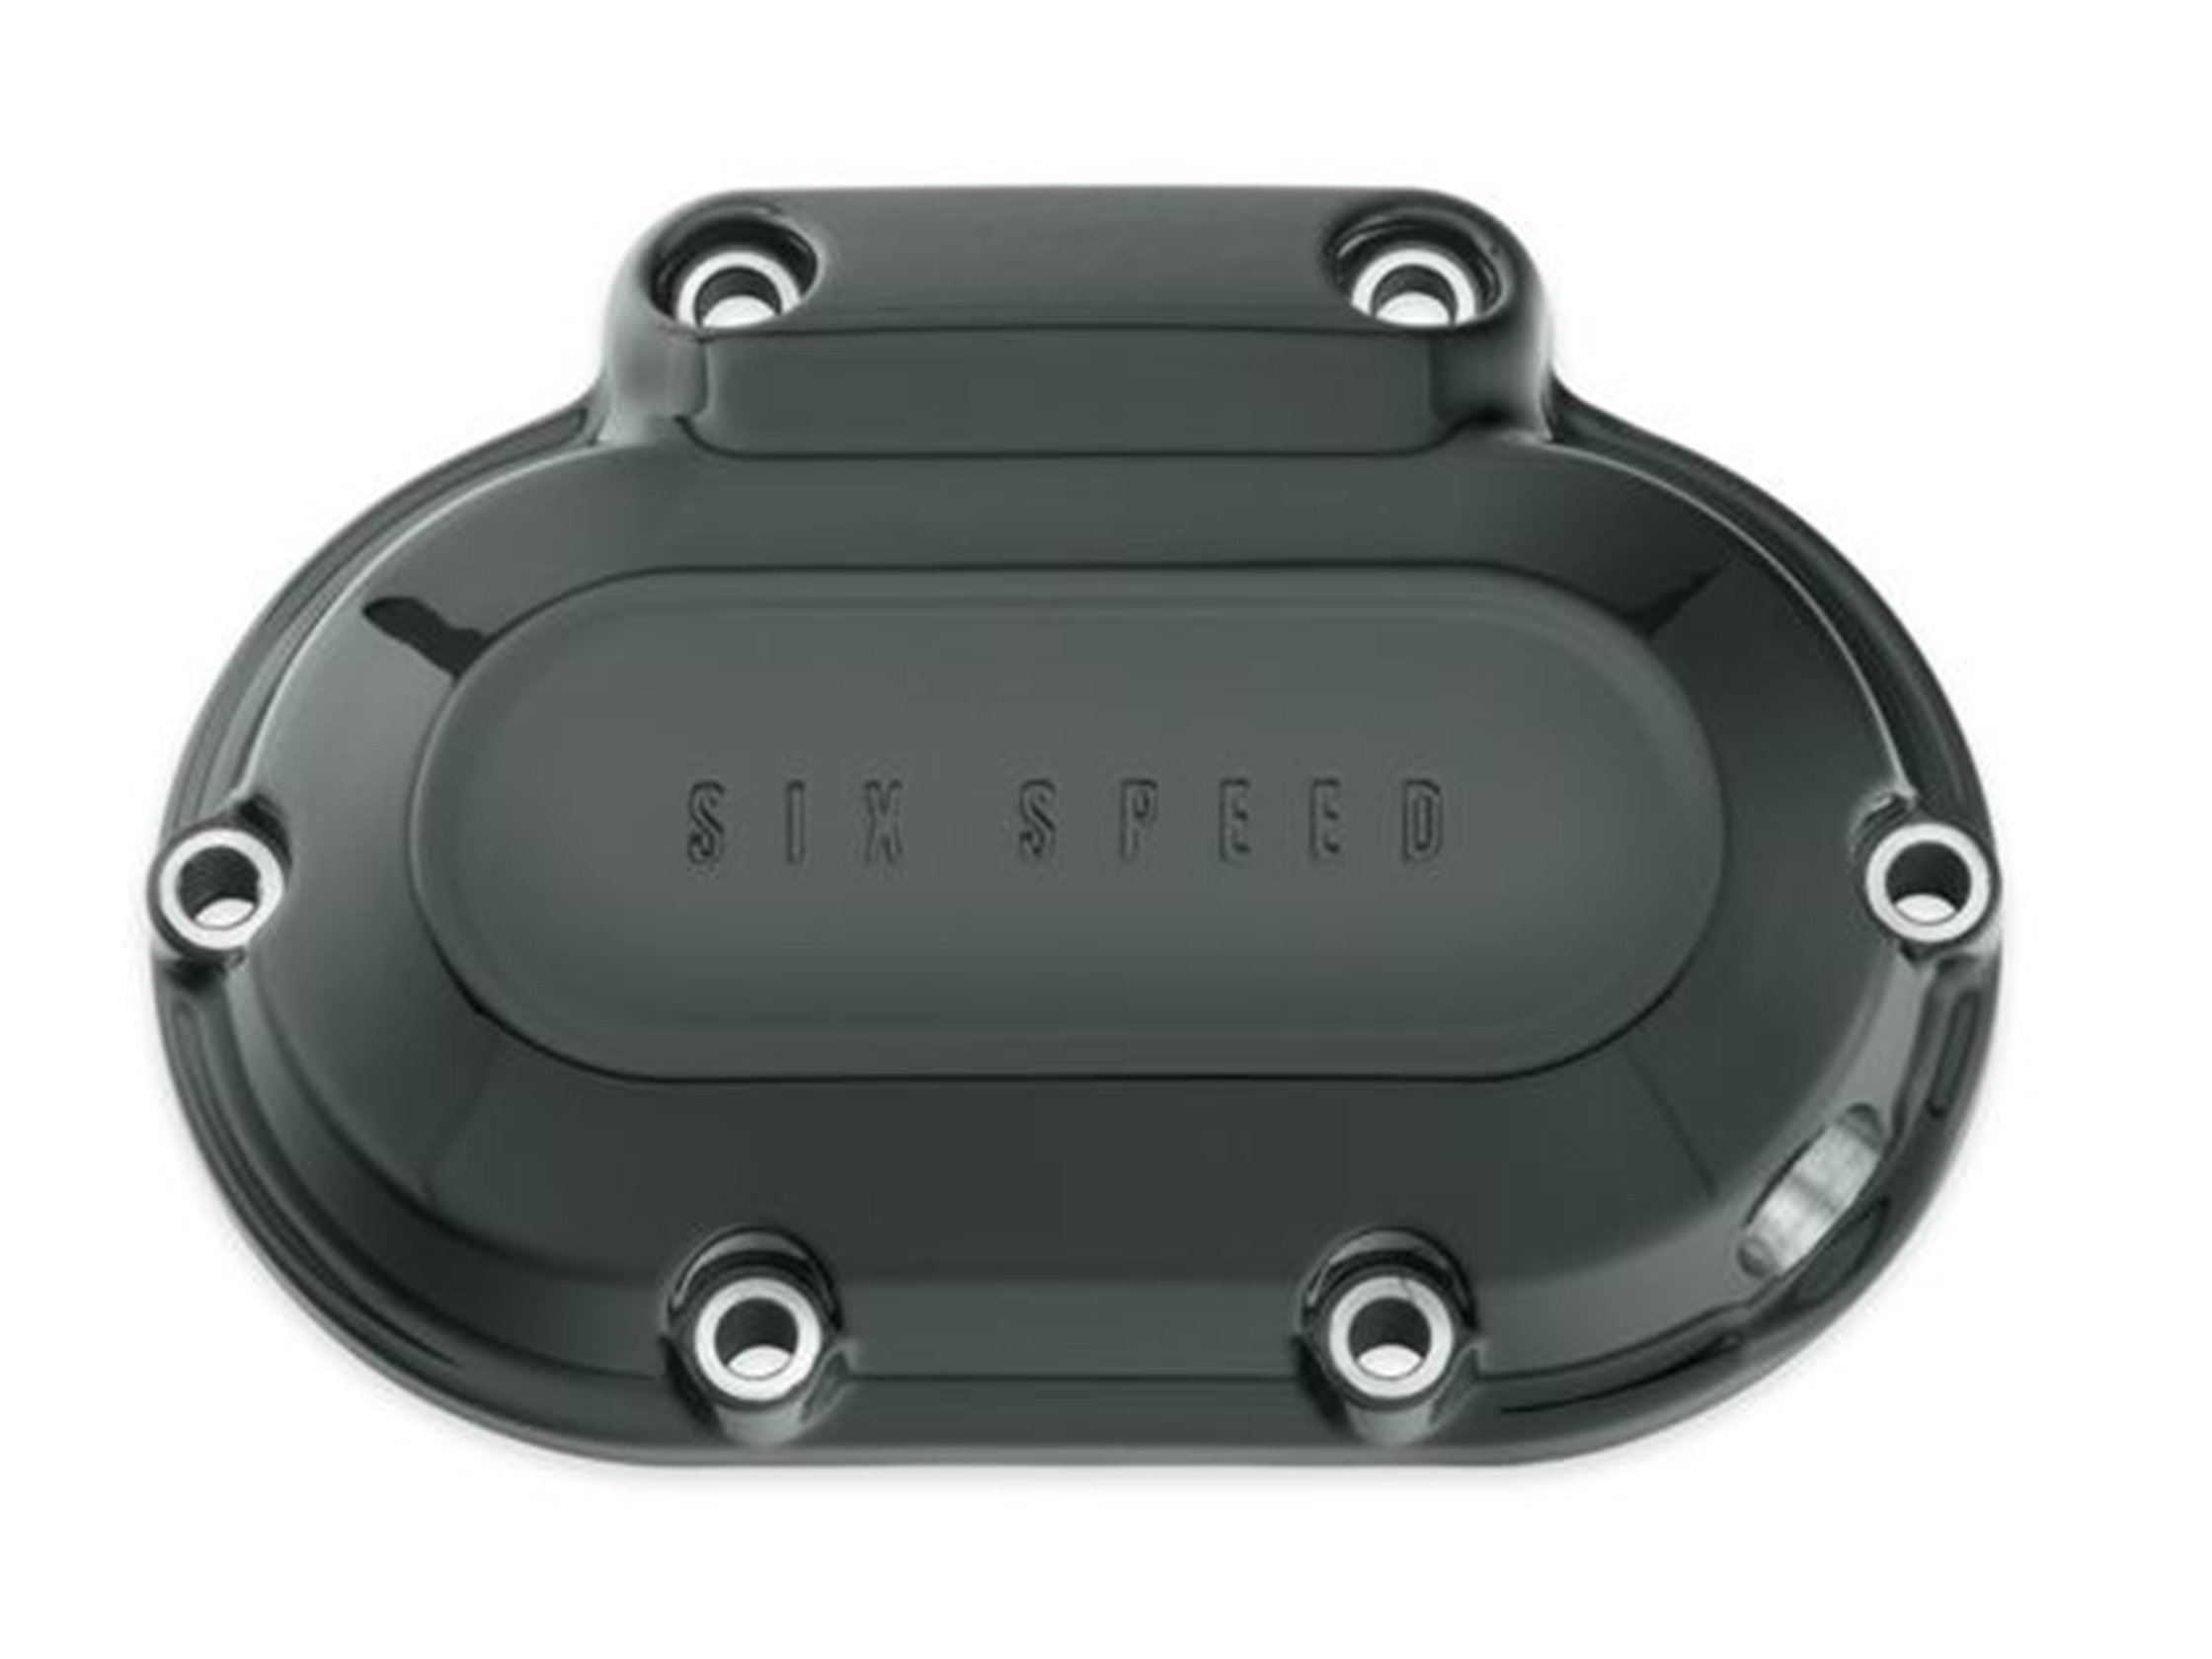 TWIN CAM ENGINE COVERS - GLOSS BLACK - Transmission Side Cover - <br />Fits  '06-later Dyna and '07-later Softail 37193-11 / Transmission Covers /  Multi-fit / Parts & Accessories / - House-of-Flames Harley-Davidson